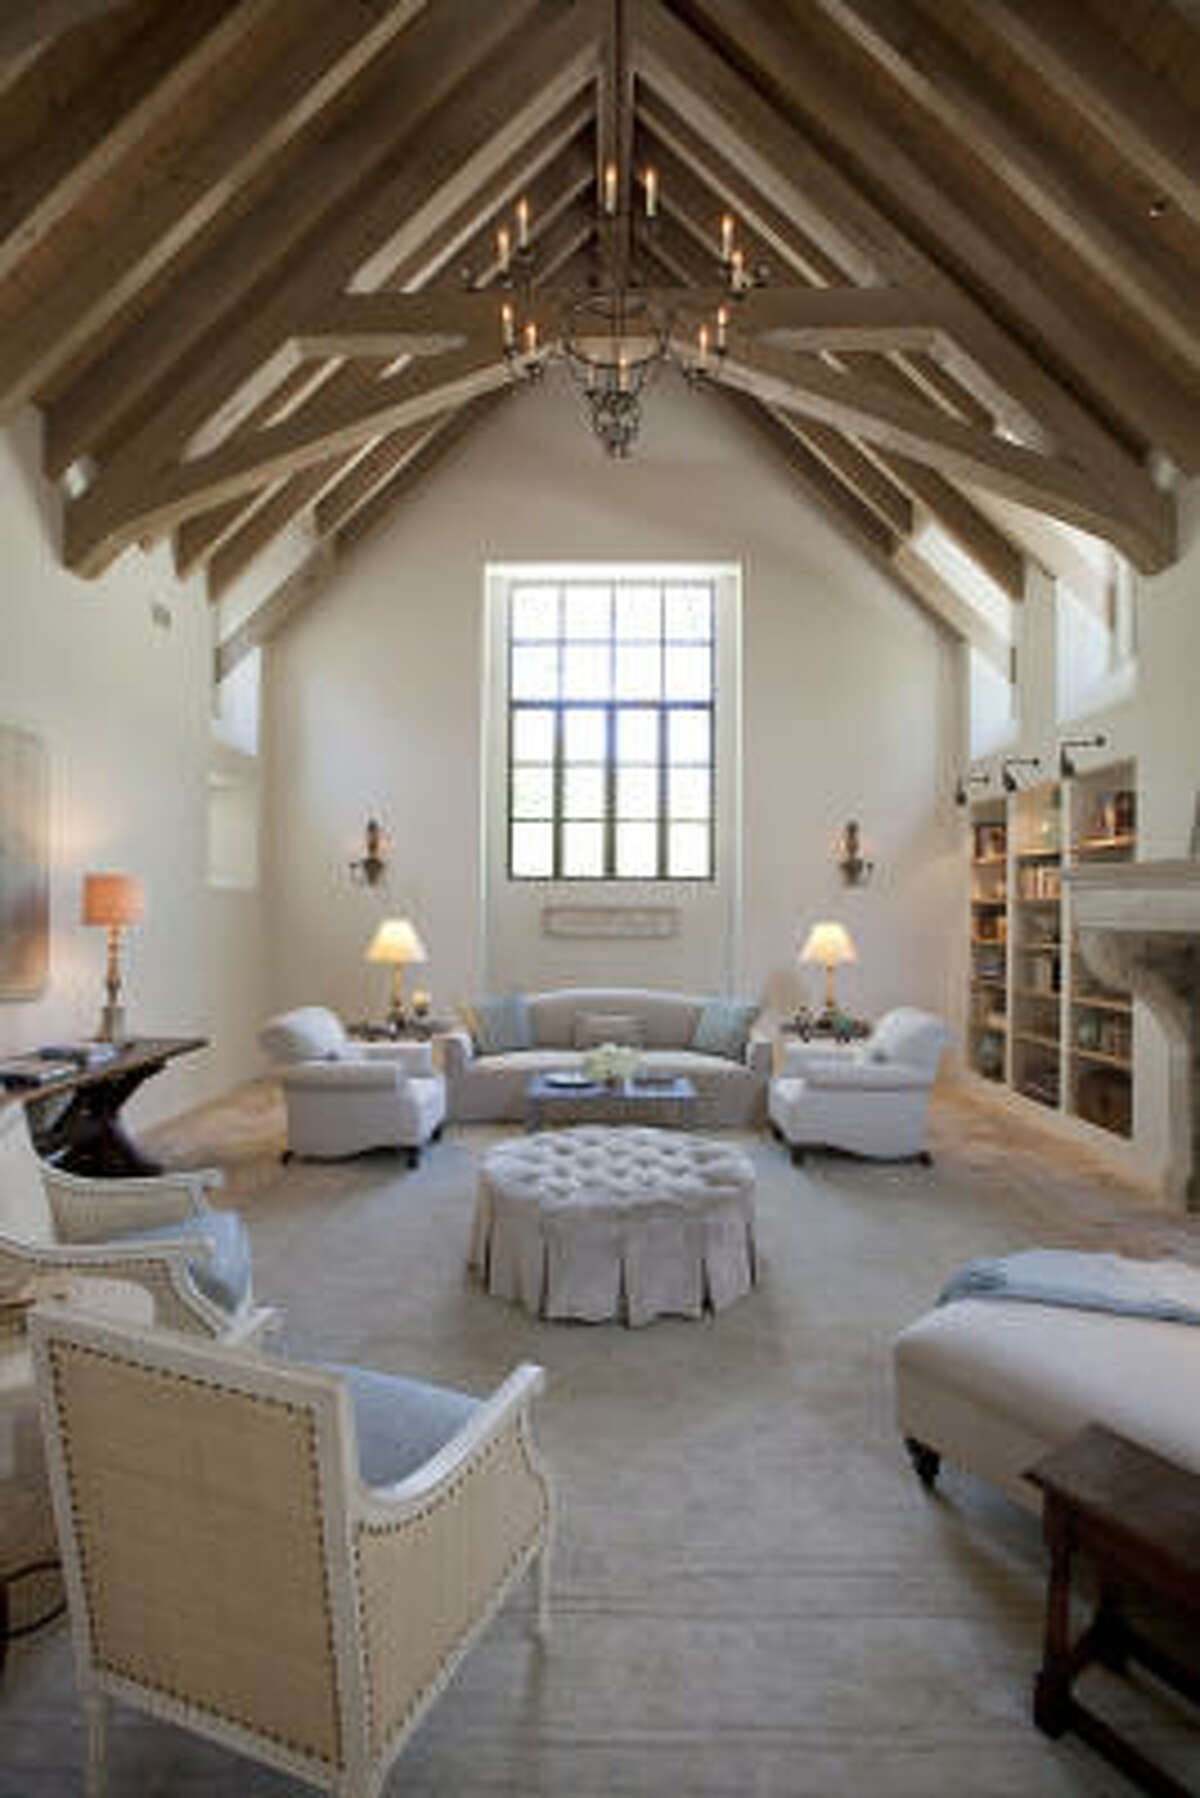 In the living room, a chandelier from Formations hangs from the dramatic ceiling; nearly all of the exposed beams and joists came from on-site pine trees. Vandrick James Furniture (to the trade only) crafted the upholstered pieces. The fireplace from Chateau Domingue is covered in glass to protect indoor air quality.